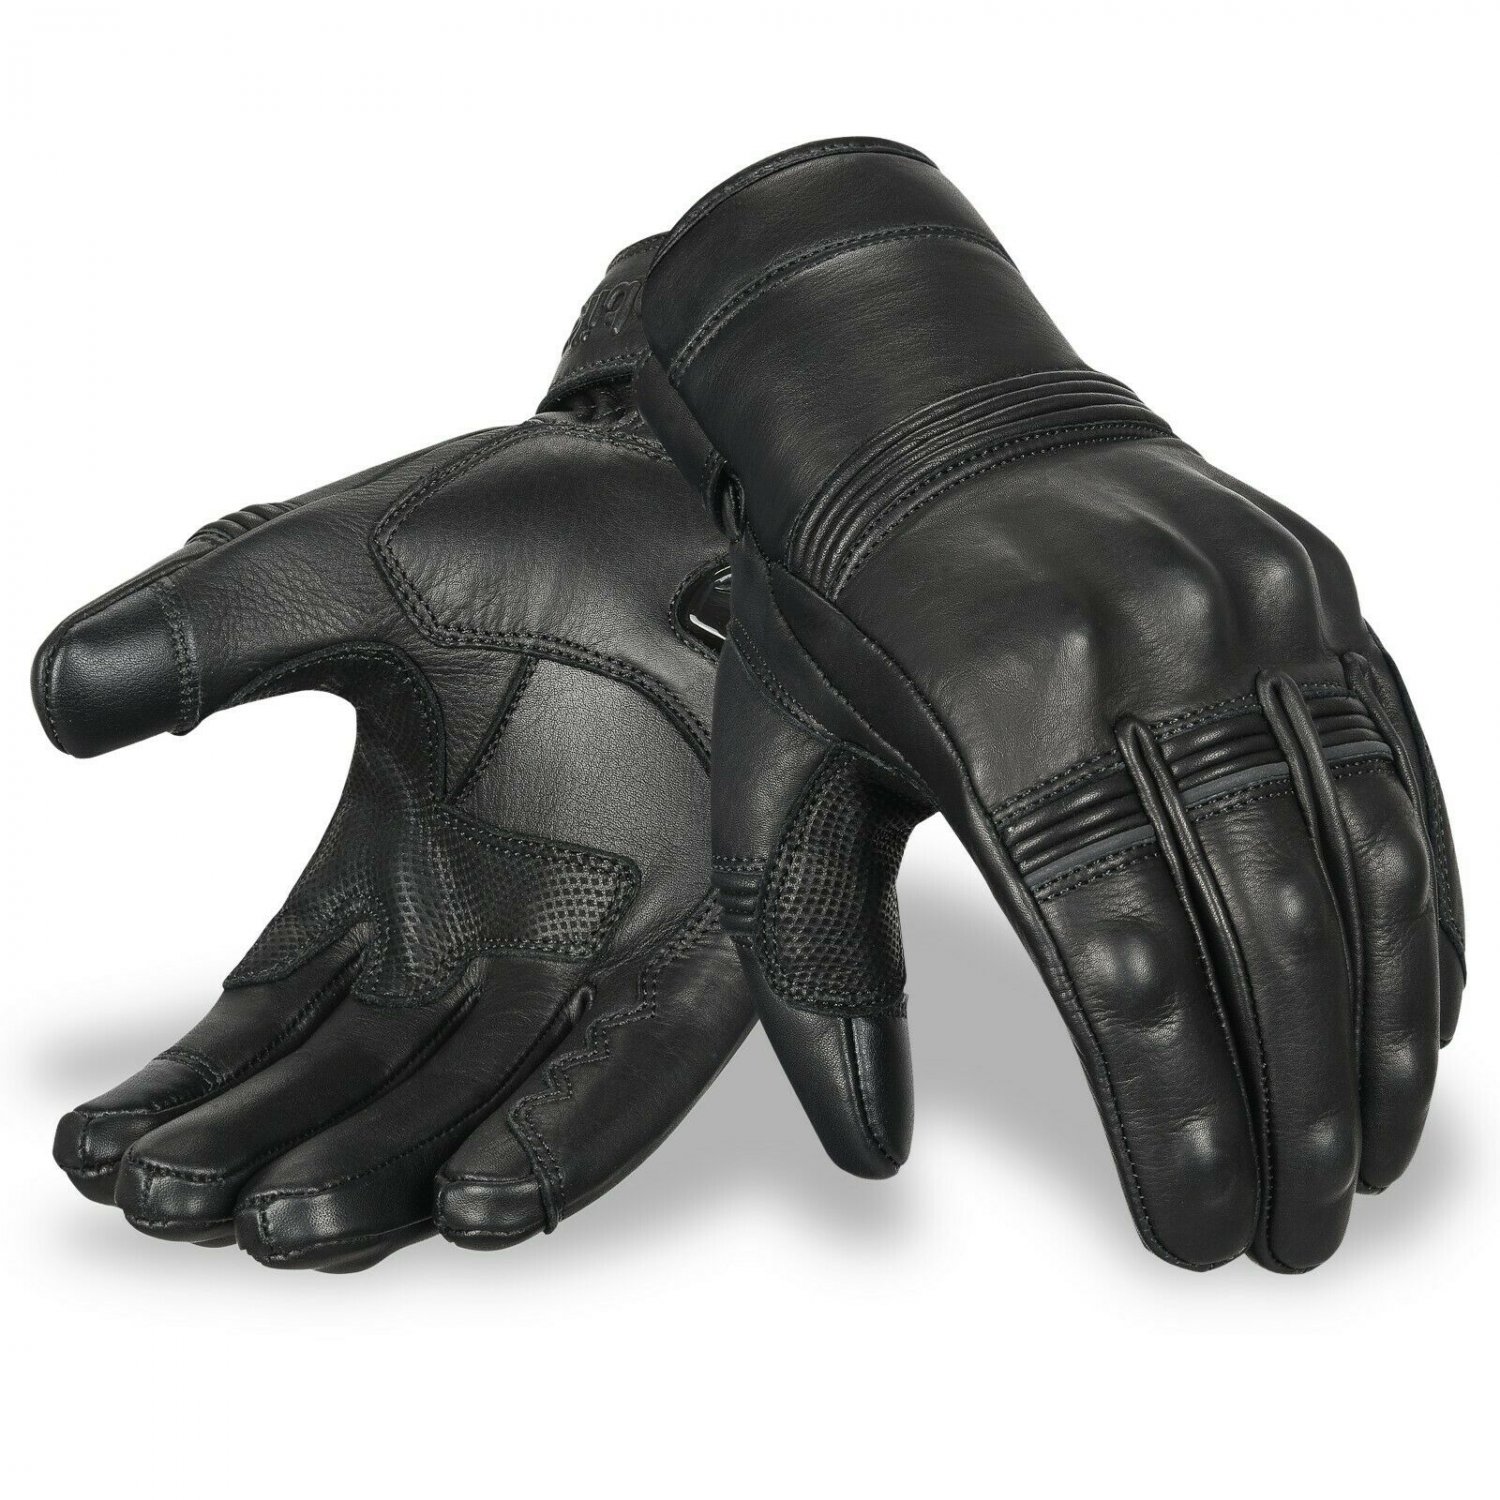 Biker Motorbike Gloves Leather Touch Screen Gloves Knuckle Shell Protection- Size XXL